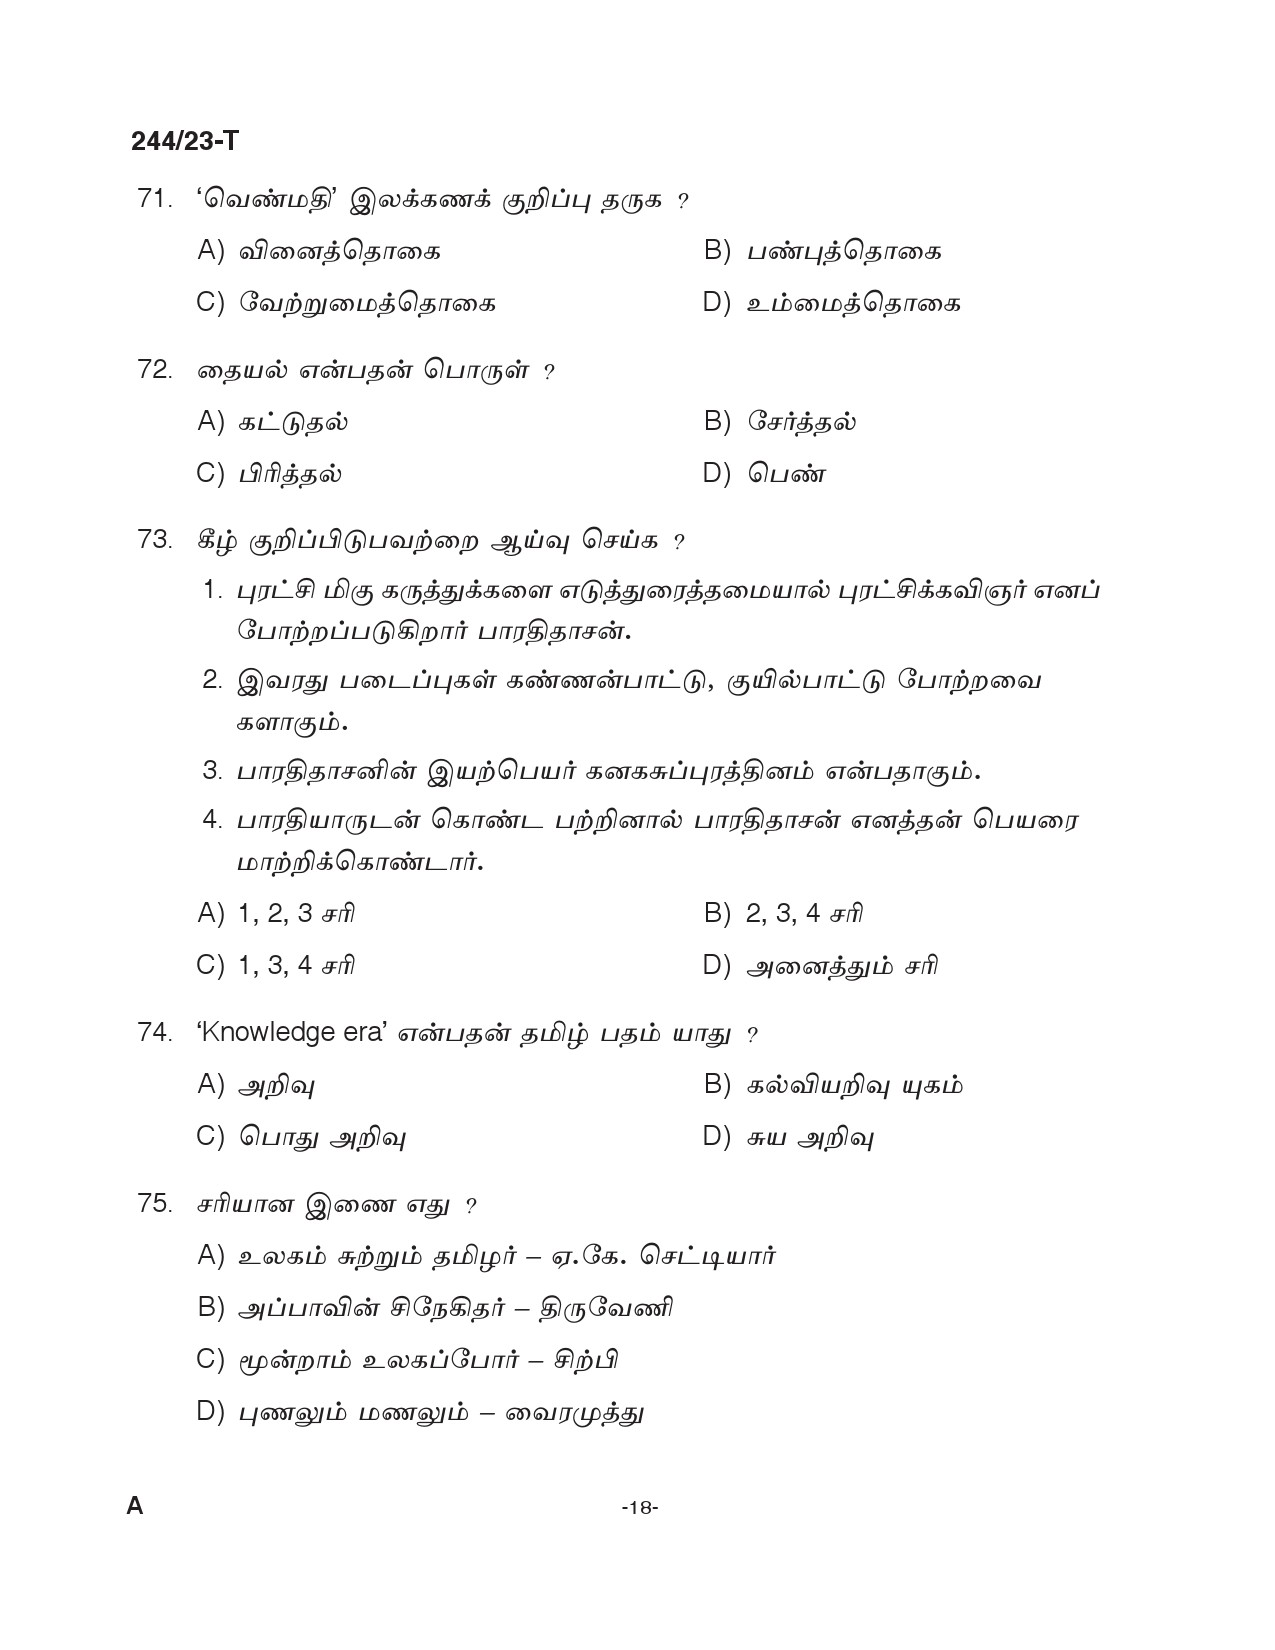 KPSC Fire and Rescue Officer Trainee Tamil Exam 2023 Code 2442023 T 17